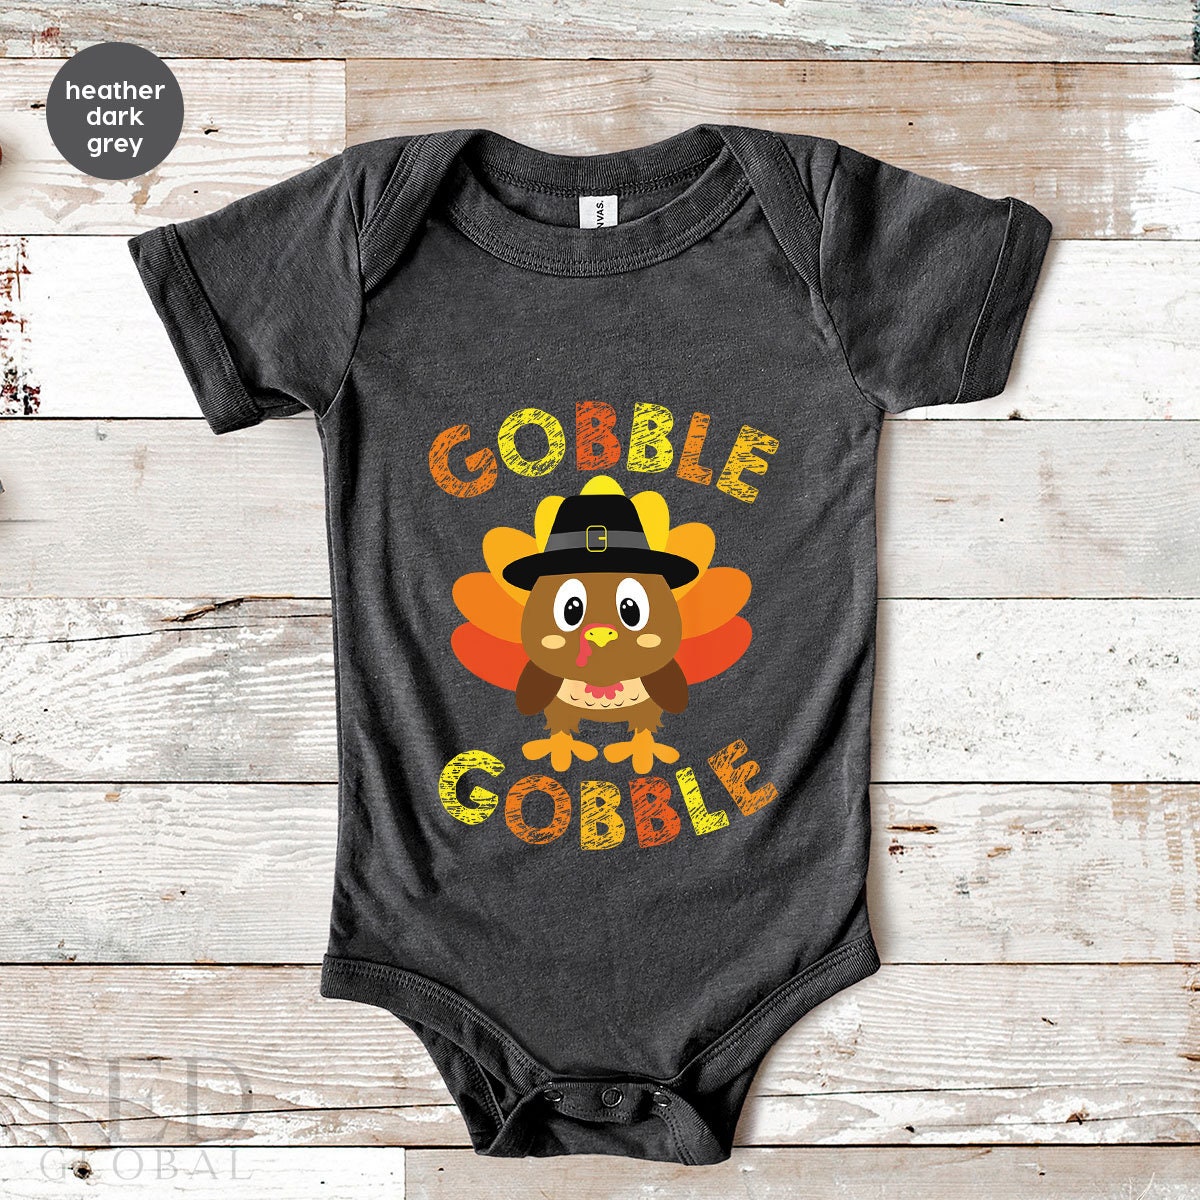 Cute Thanksgiving Gobble Gobble Baby Gift, Funny Turkey Baby Shower Gift, Fall Season Turkey New Baby Onesie, Bodysuits Kid Toddler Clothes - Fastdeliverytees.com